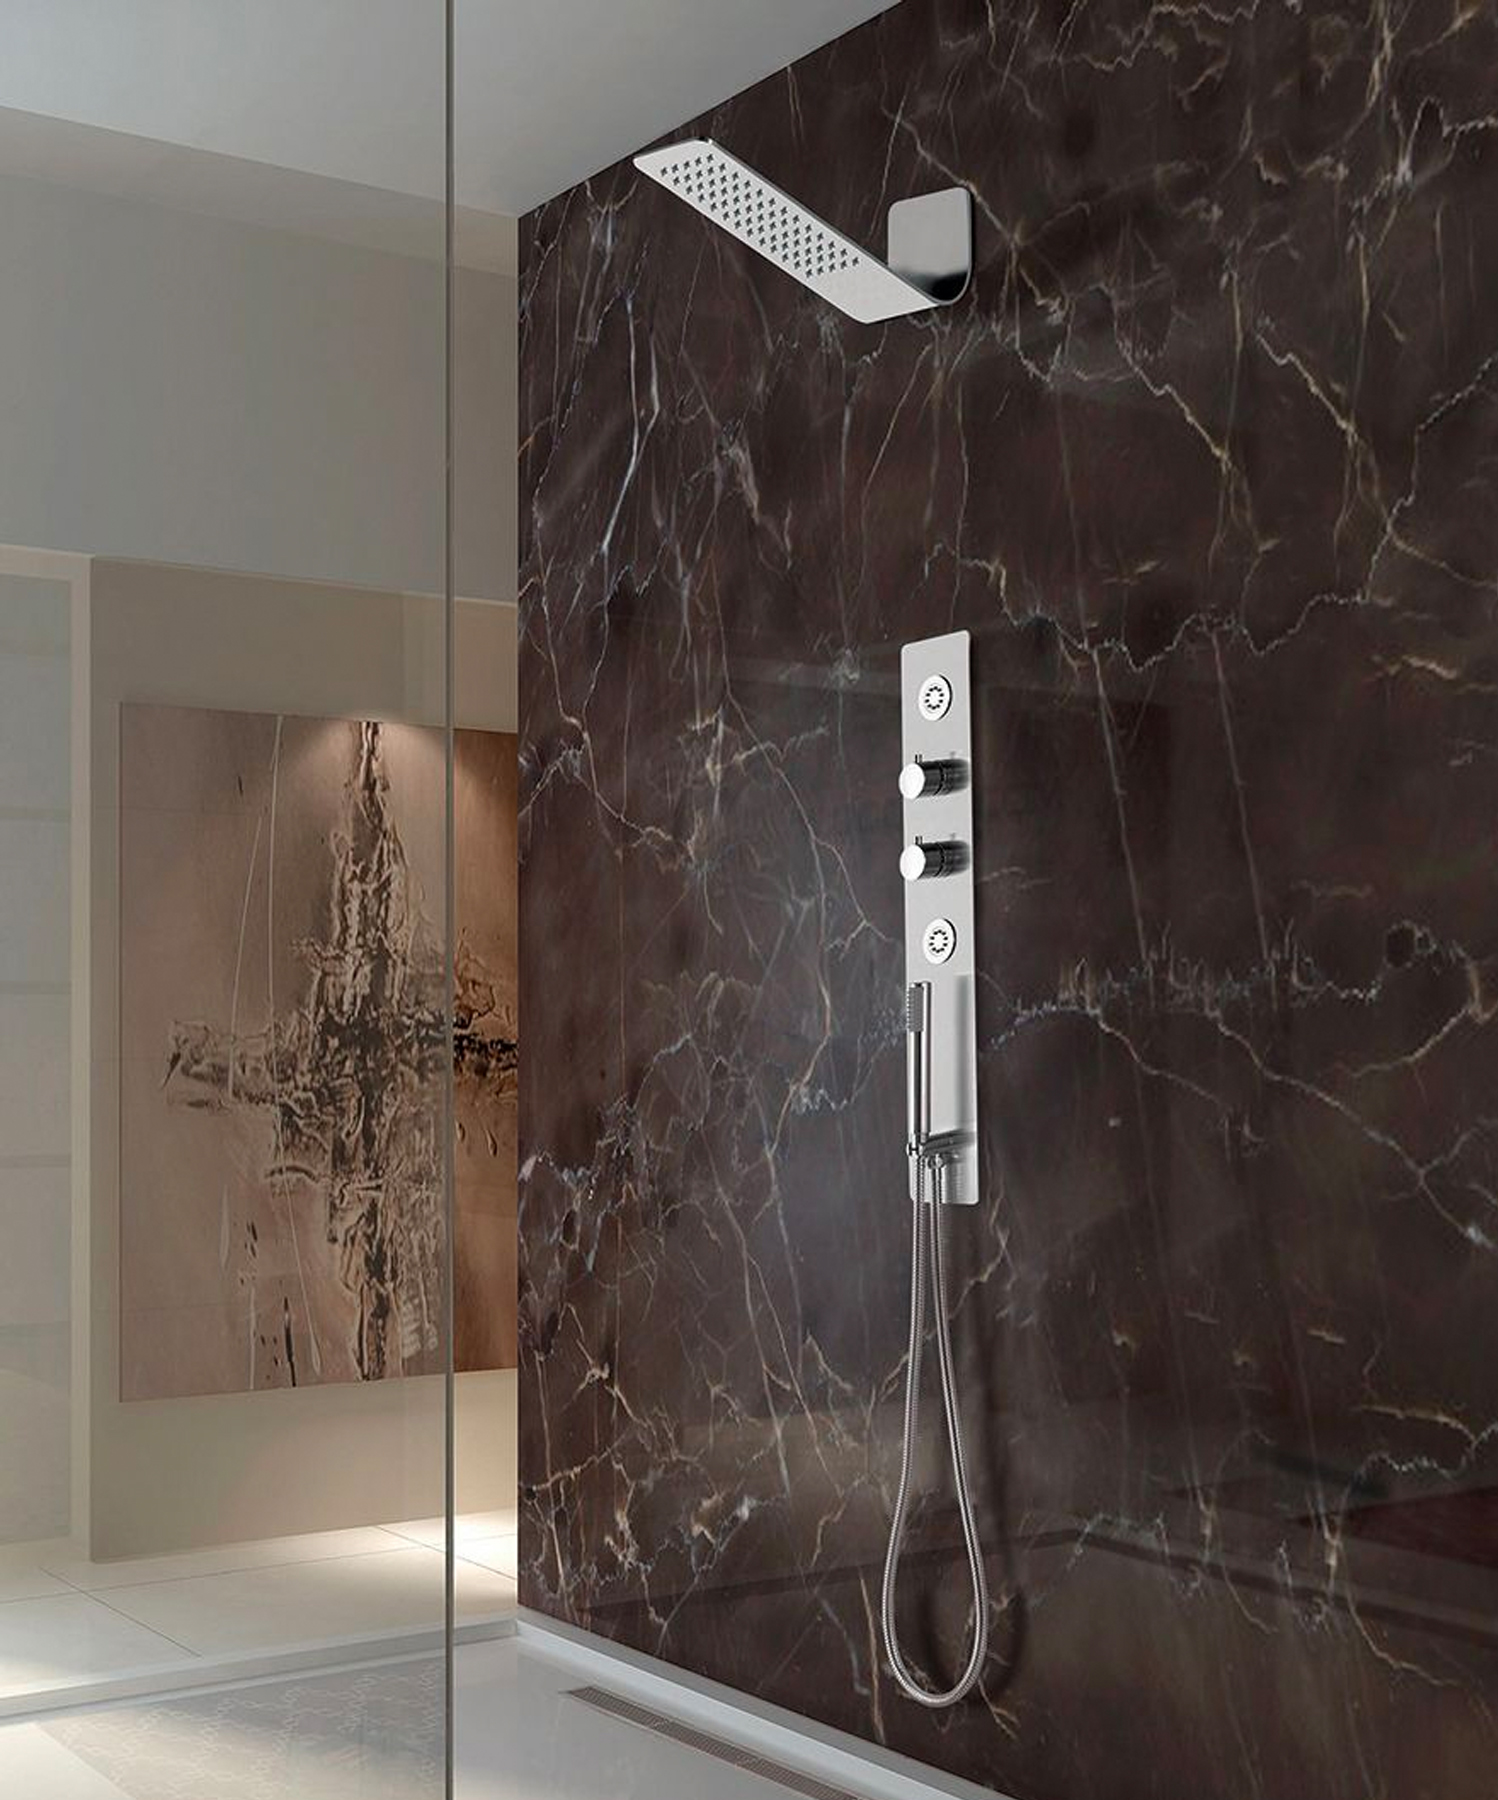 Lenova launched its Thermostatic shower system